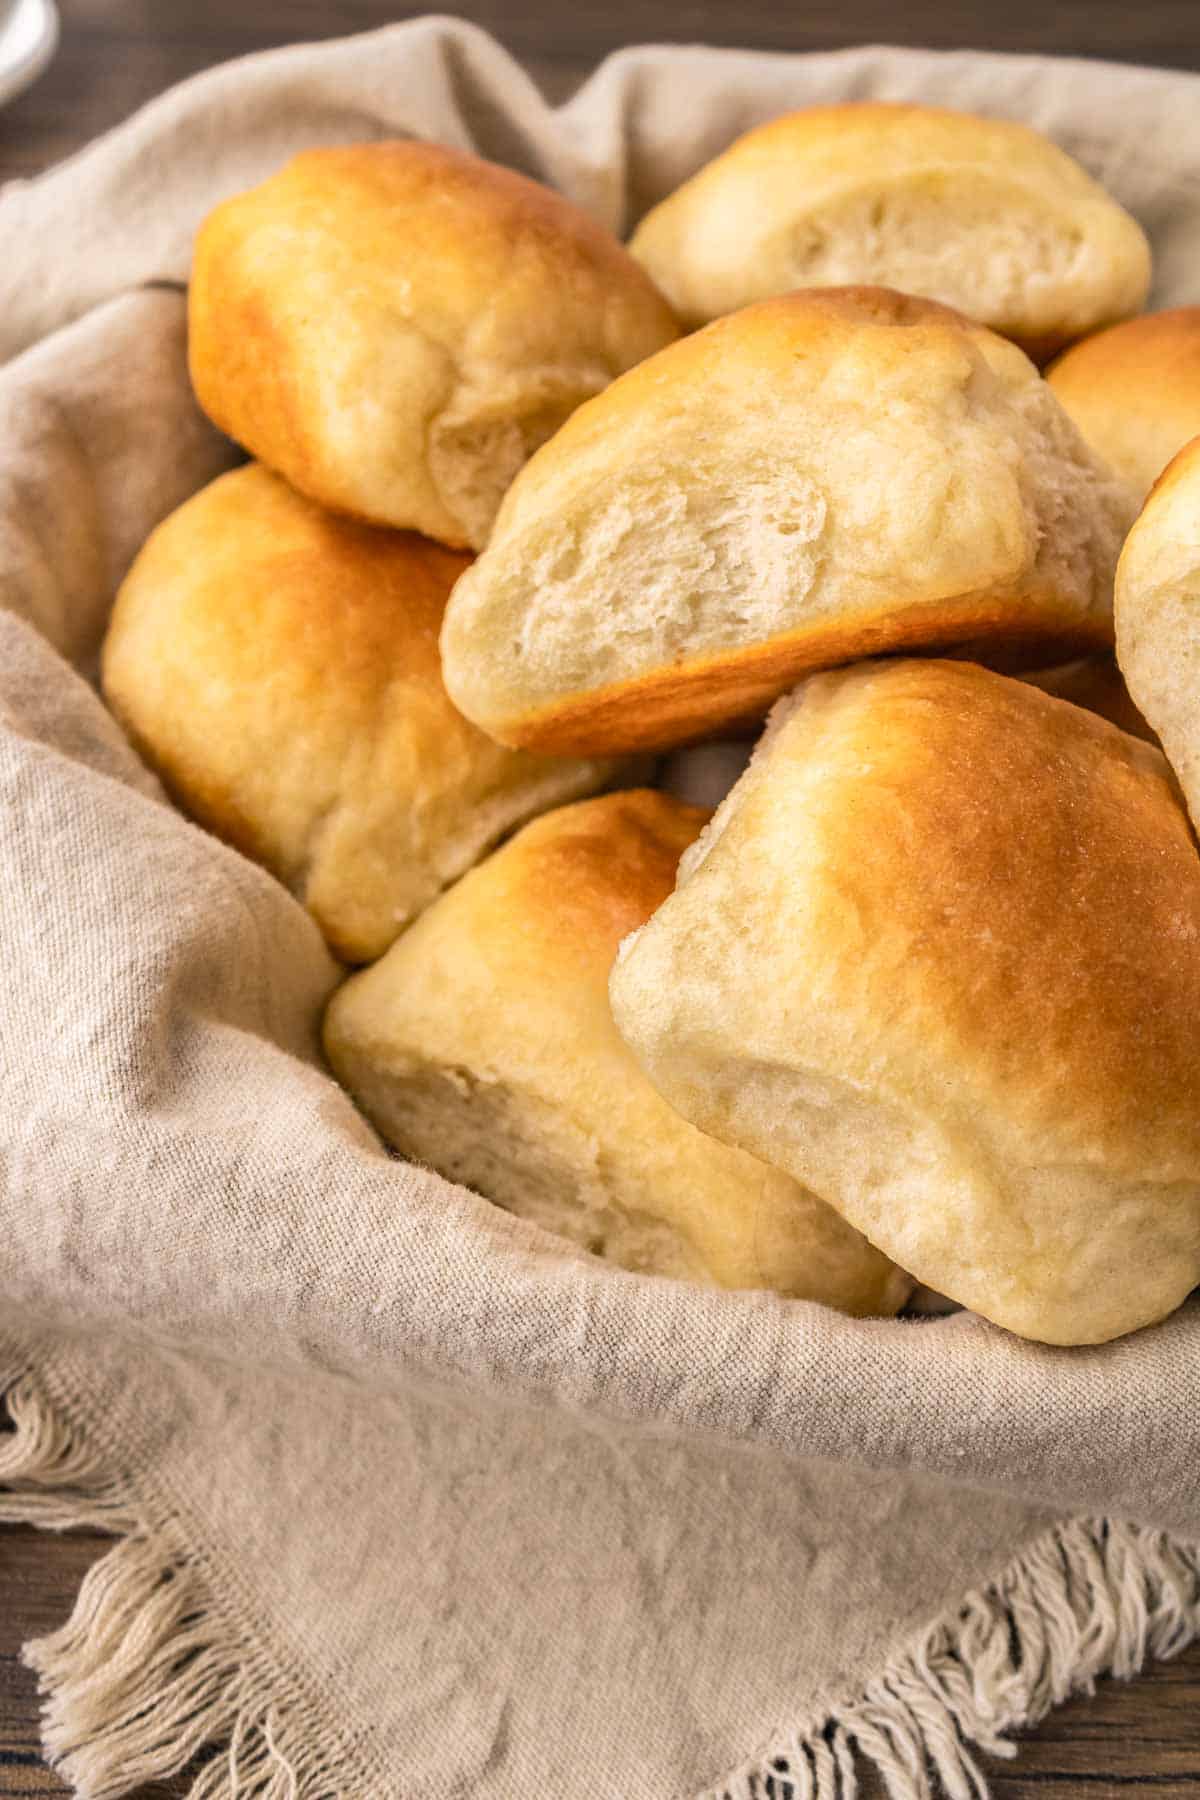 Bread rolls in a basket on a wooden table.